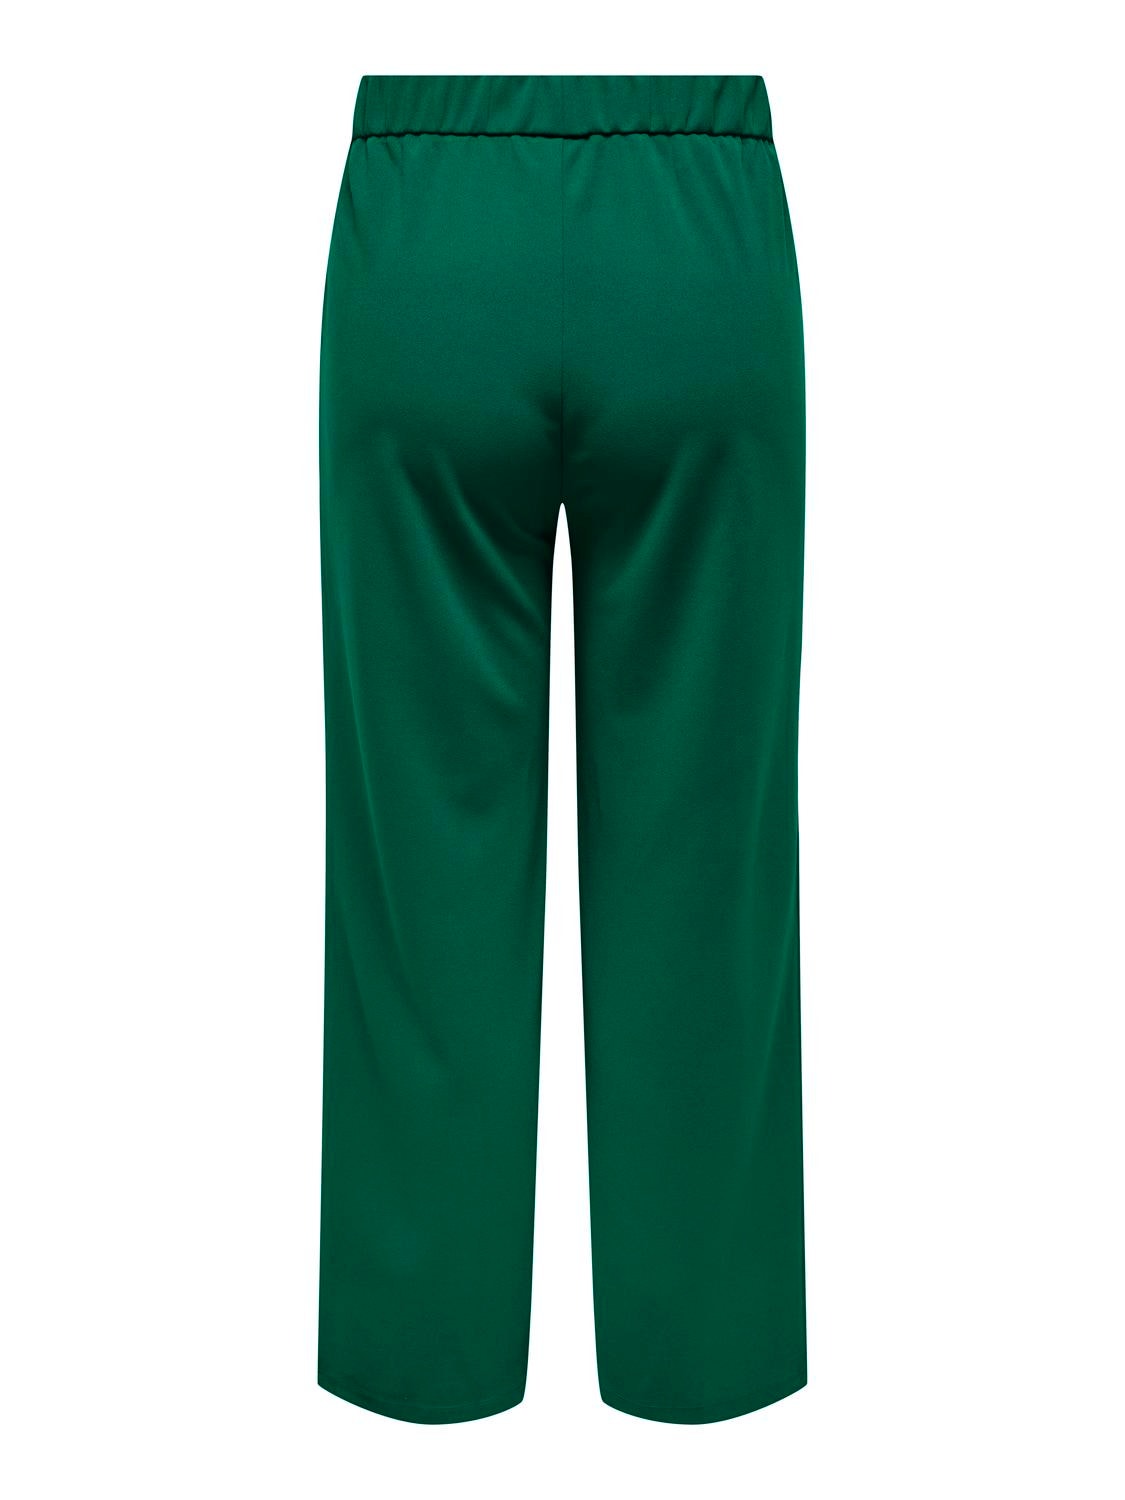 ONLY Regular Fit Curve Trousers -Aventurine - 15293196